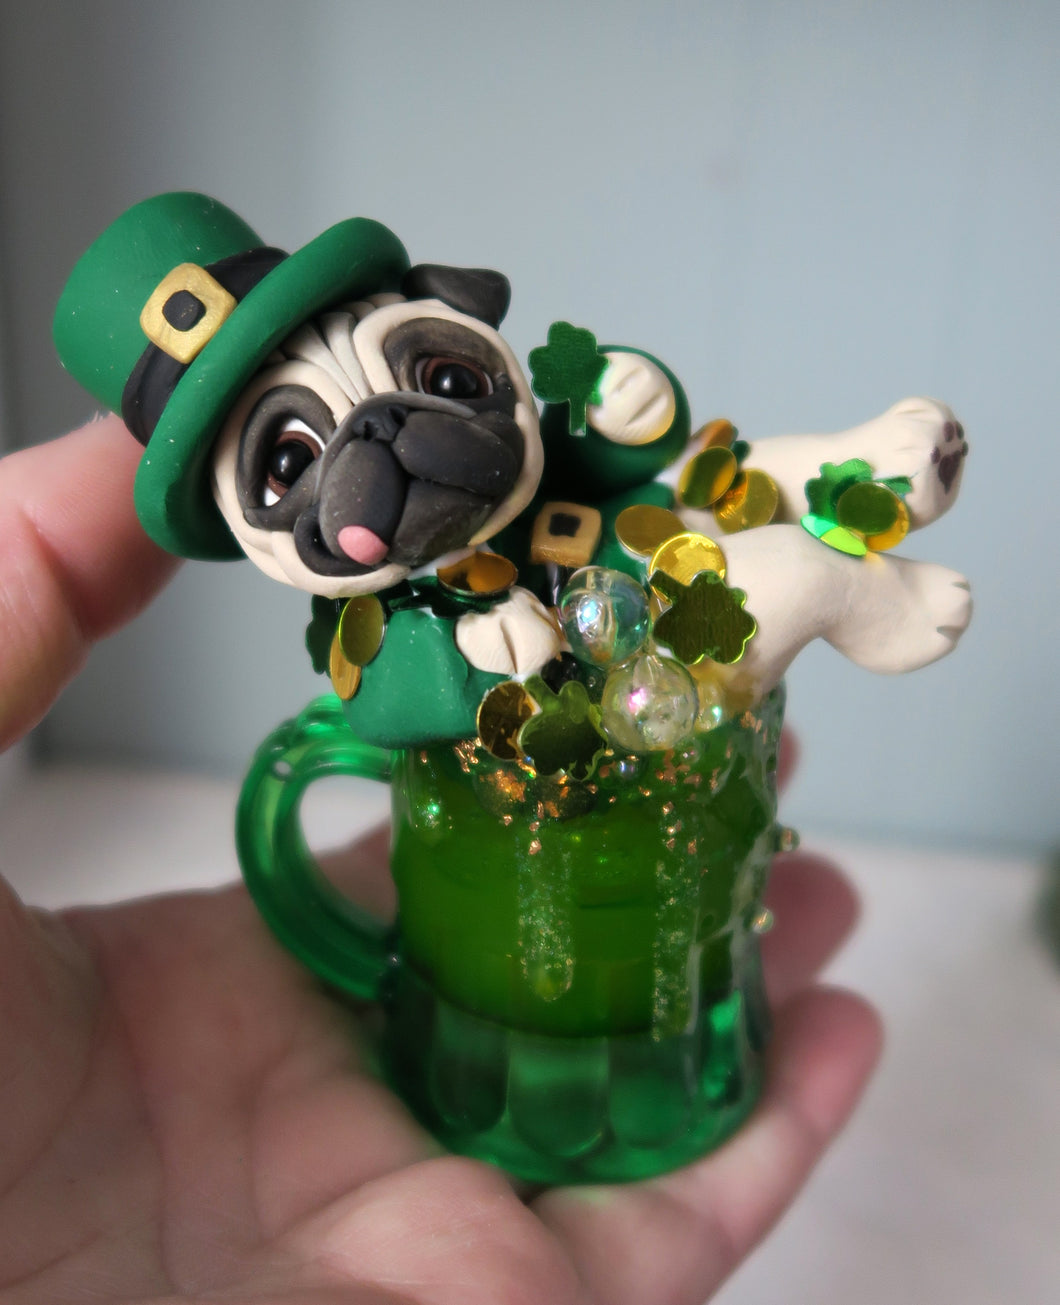 Leprechaun Pug in a Mug St. Patrick's Day Hand Sculpted Collectible